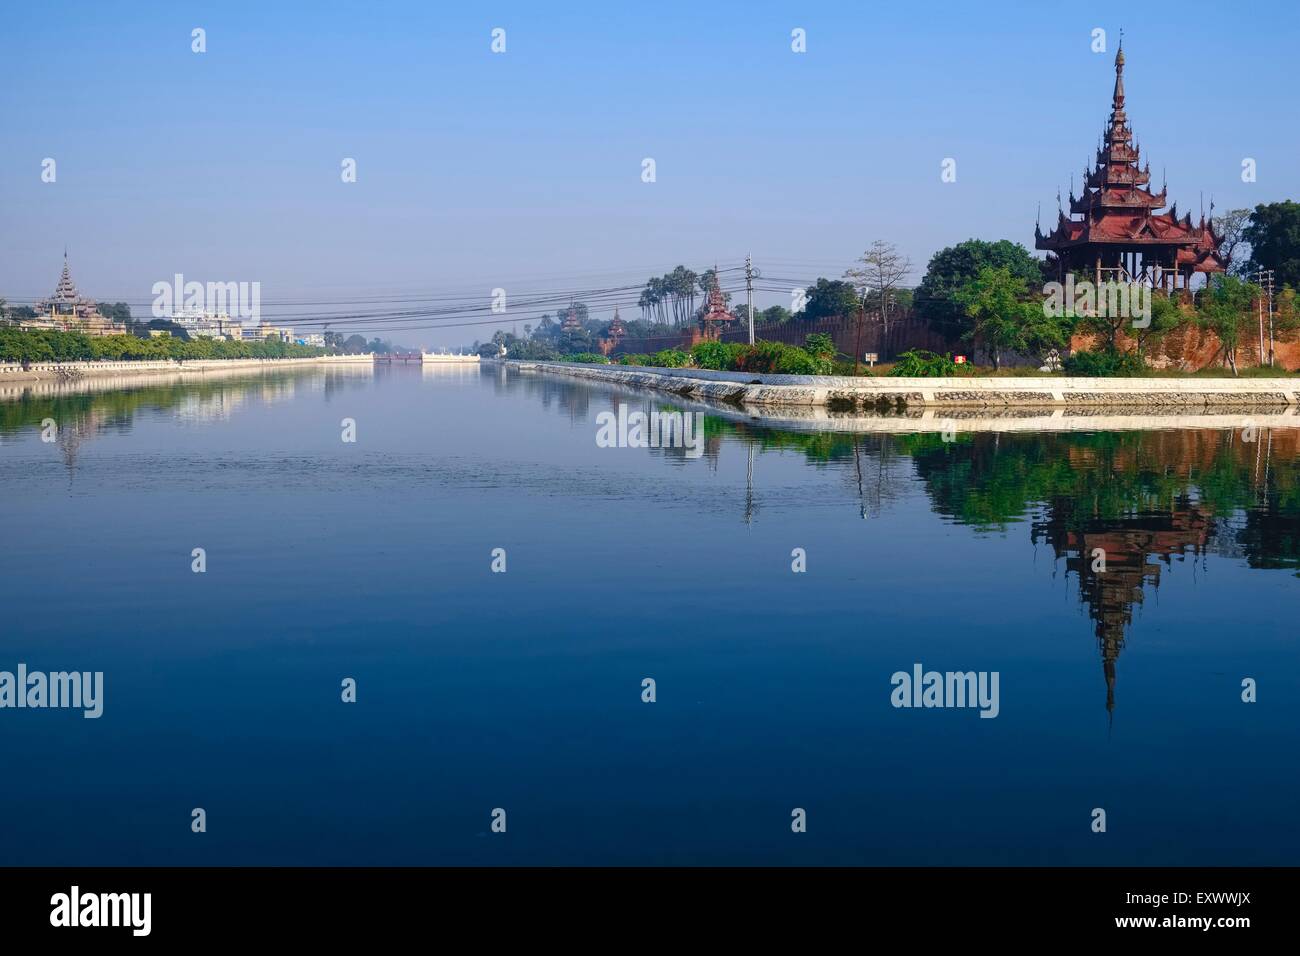 Palace of the King, Shan Staat, Myanmar, Asia Stock Photo